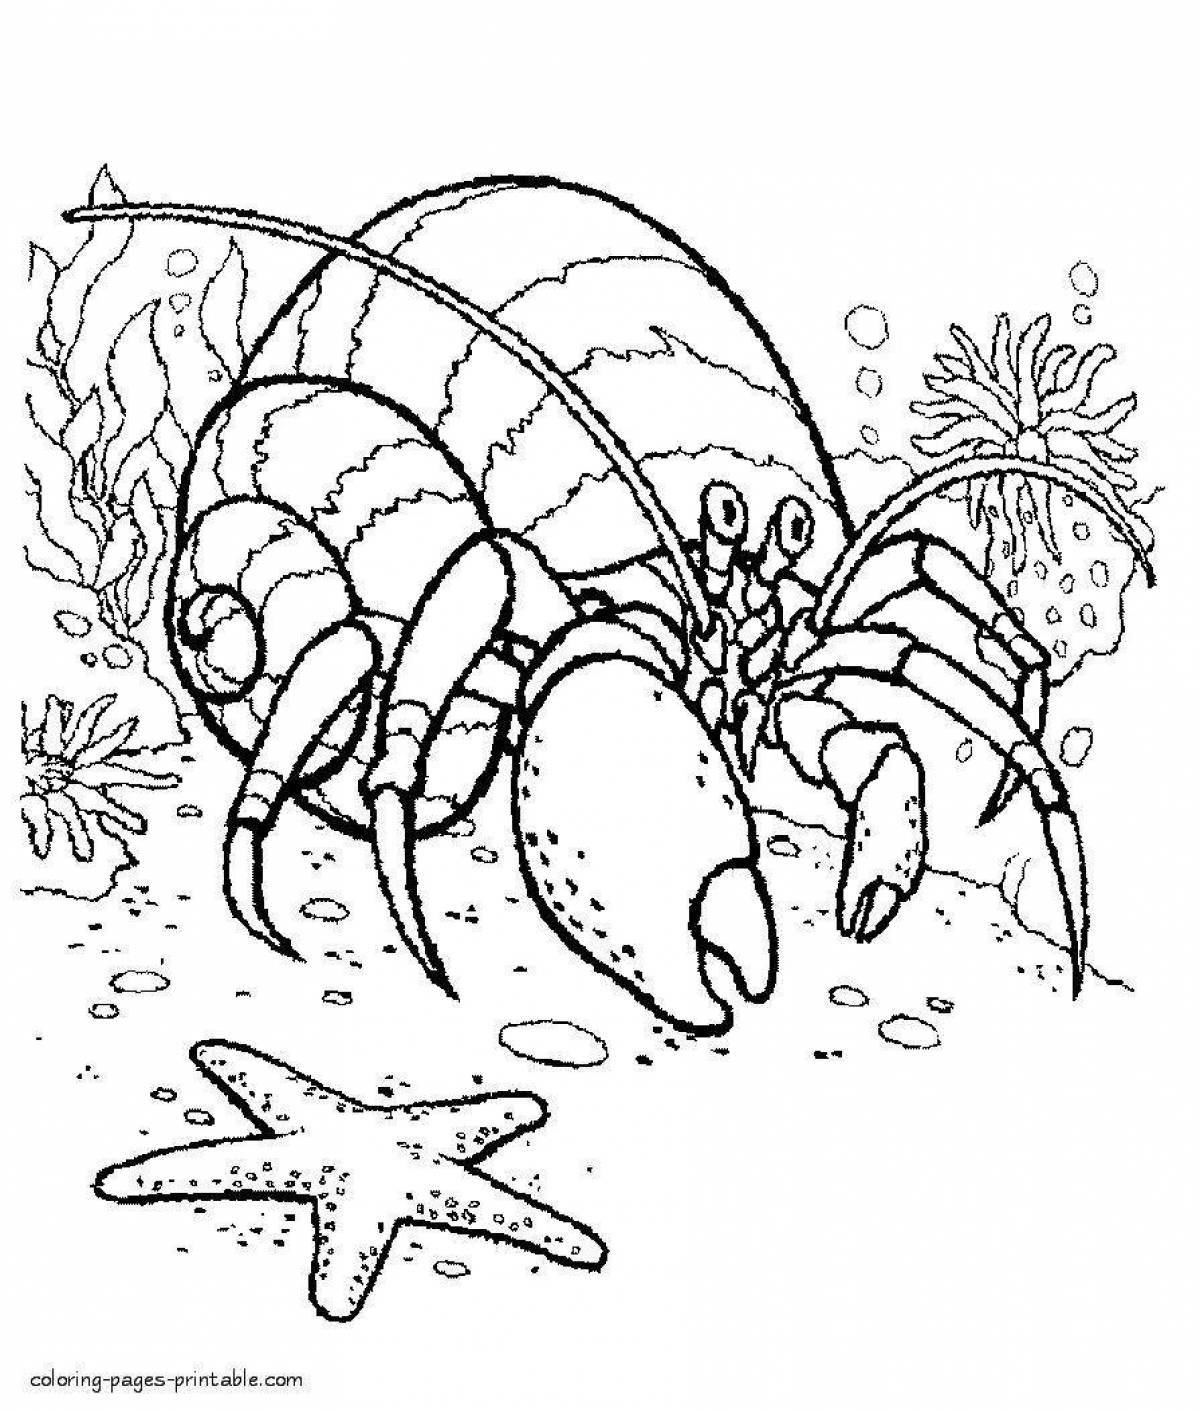 Fabulous hermit crab coloring page